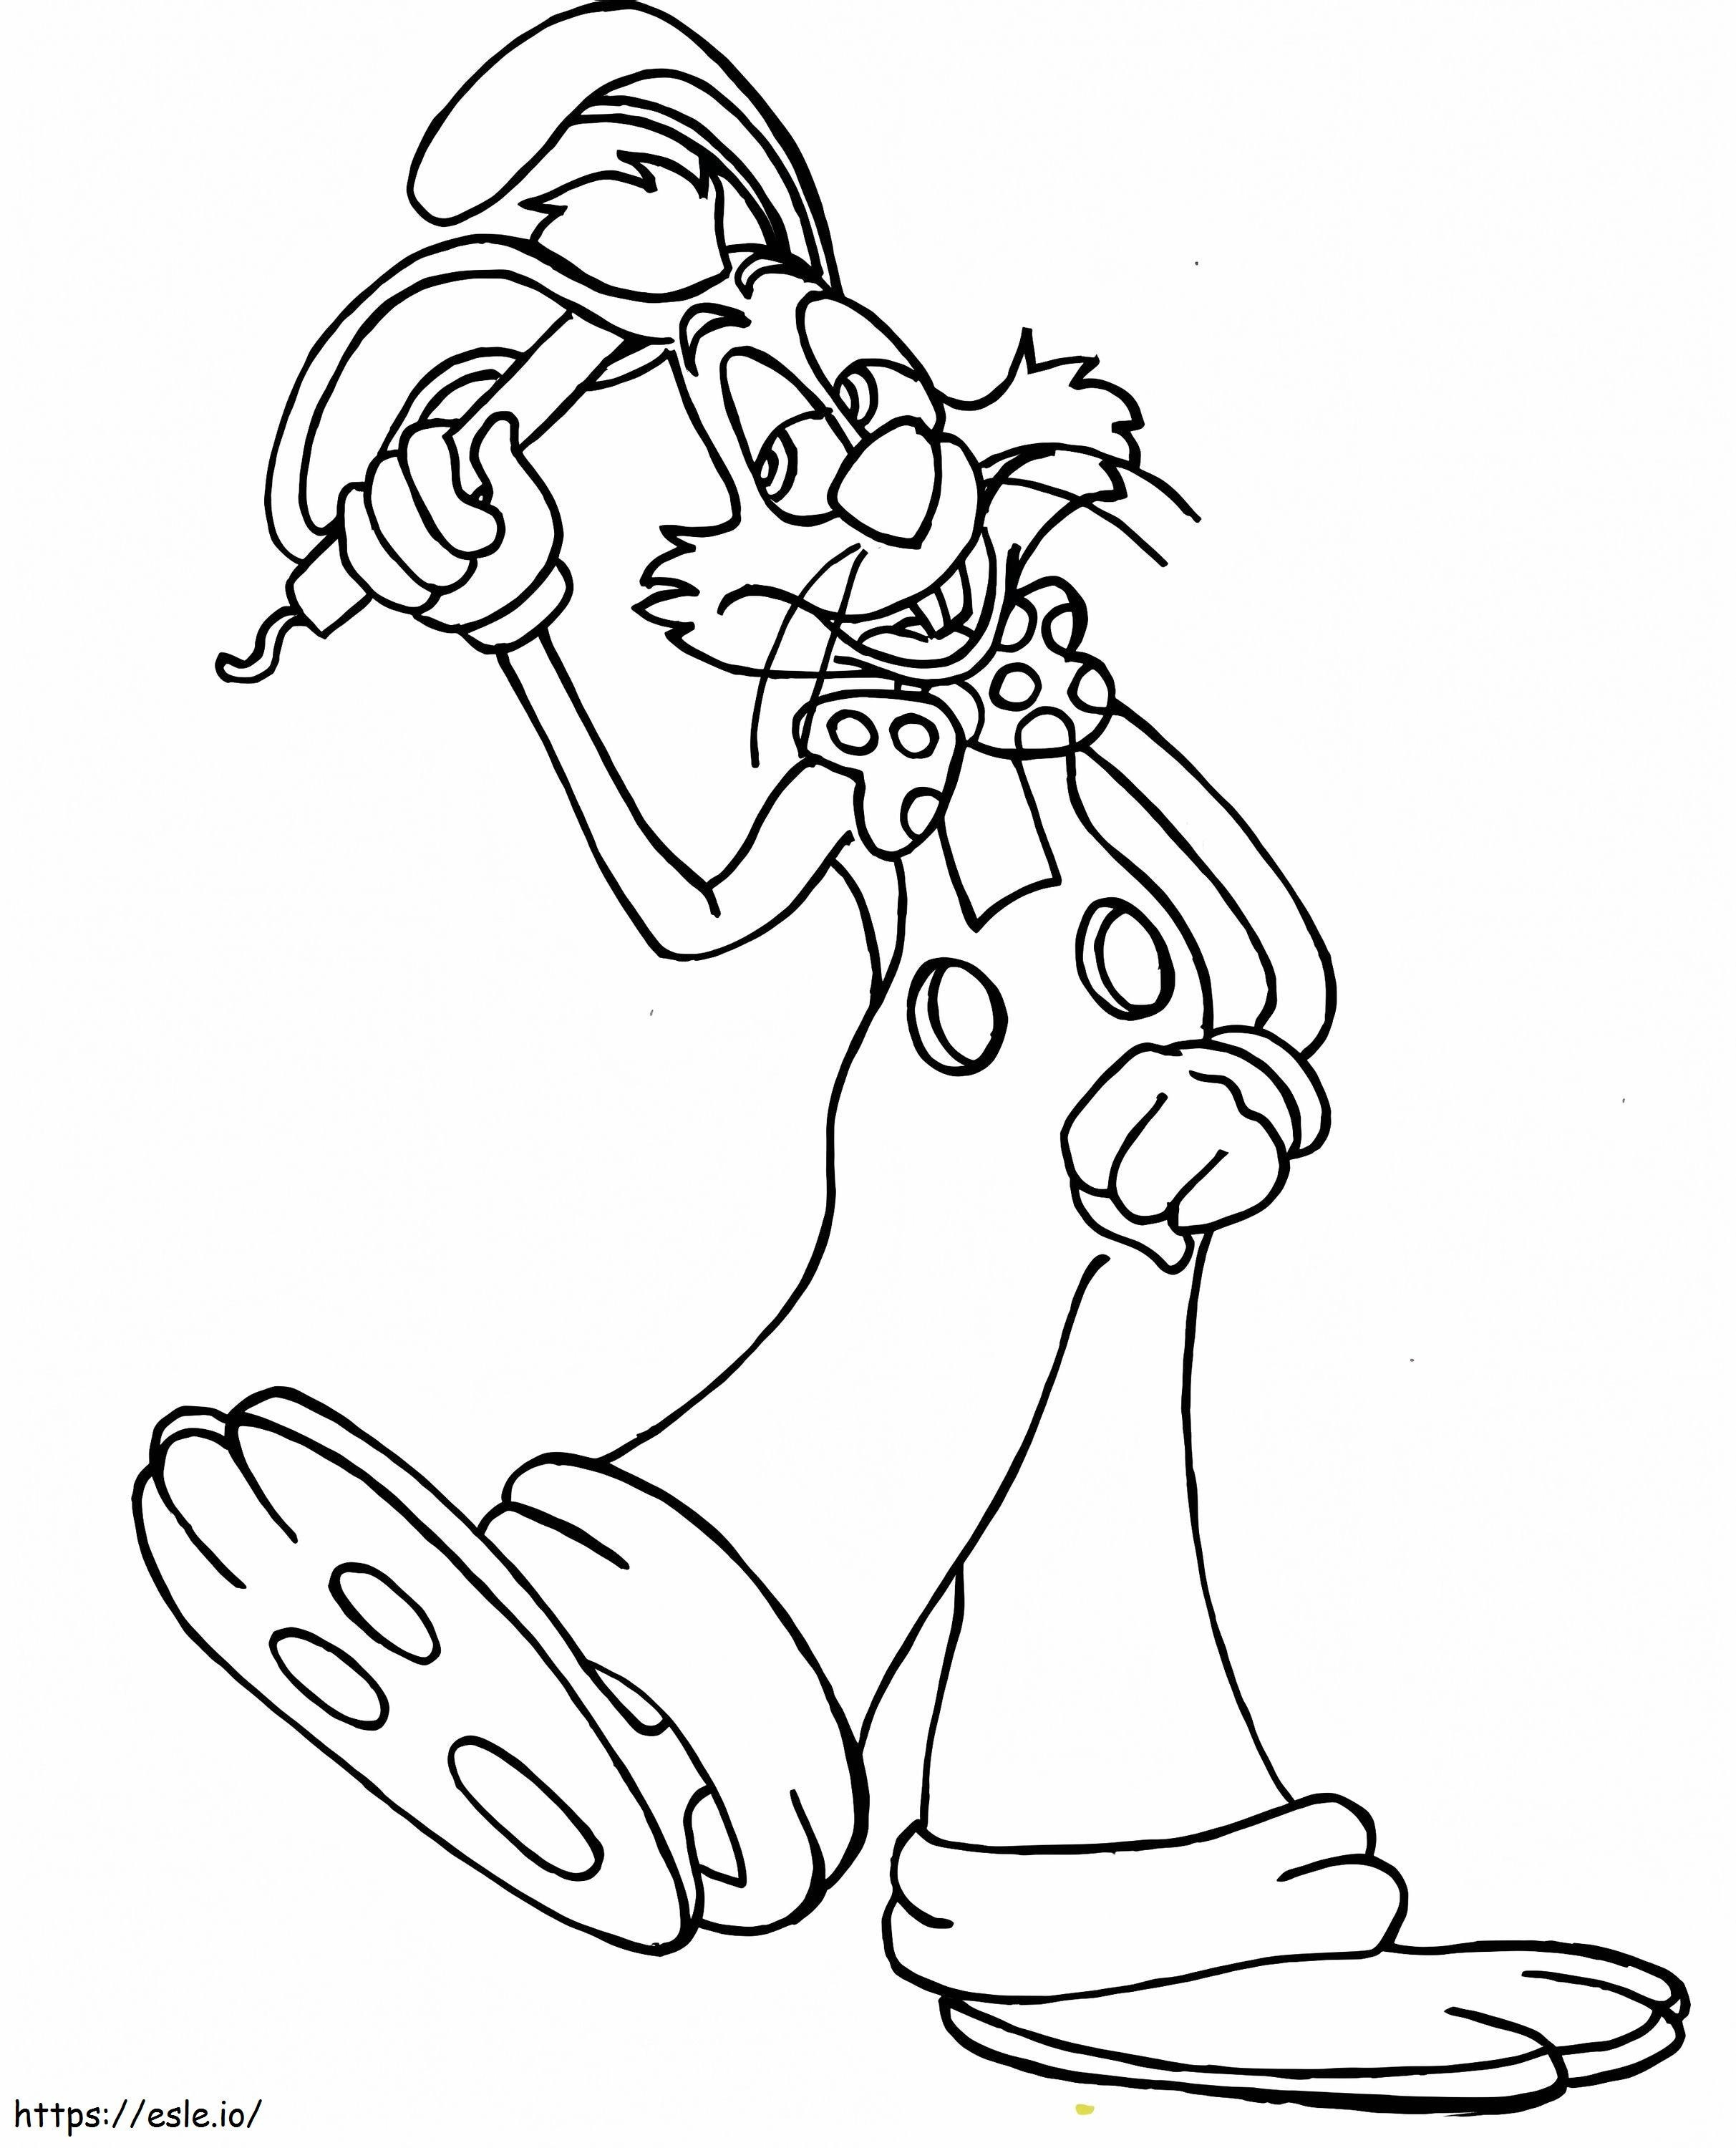 Free Roger Rabbit coloring page